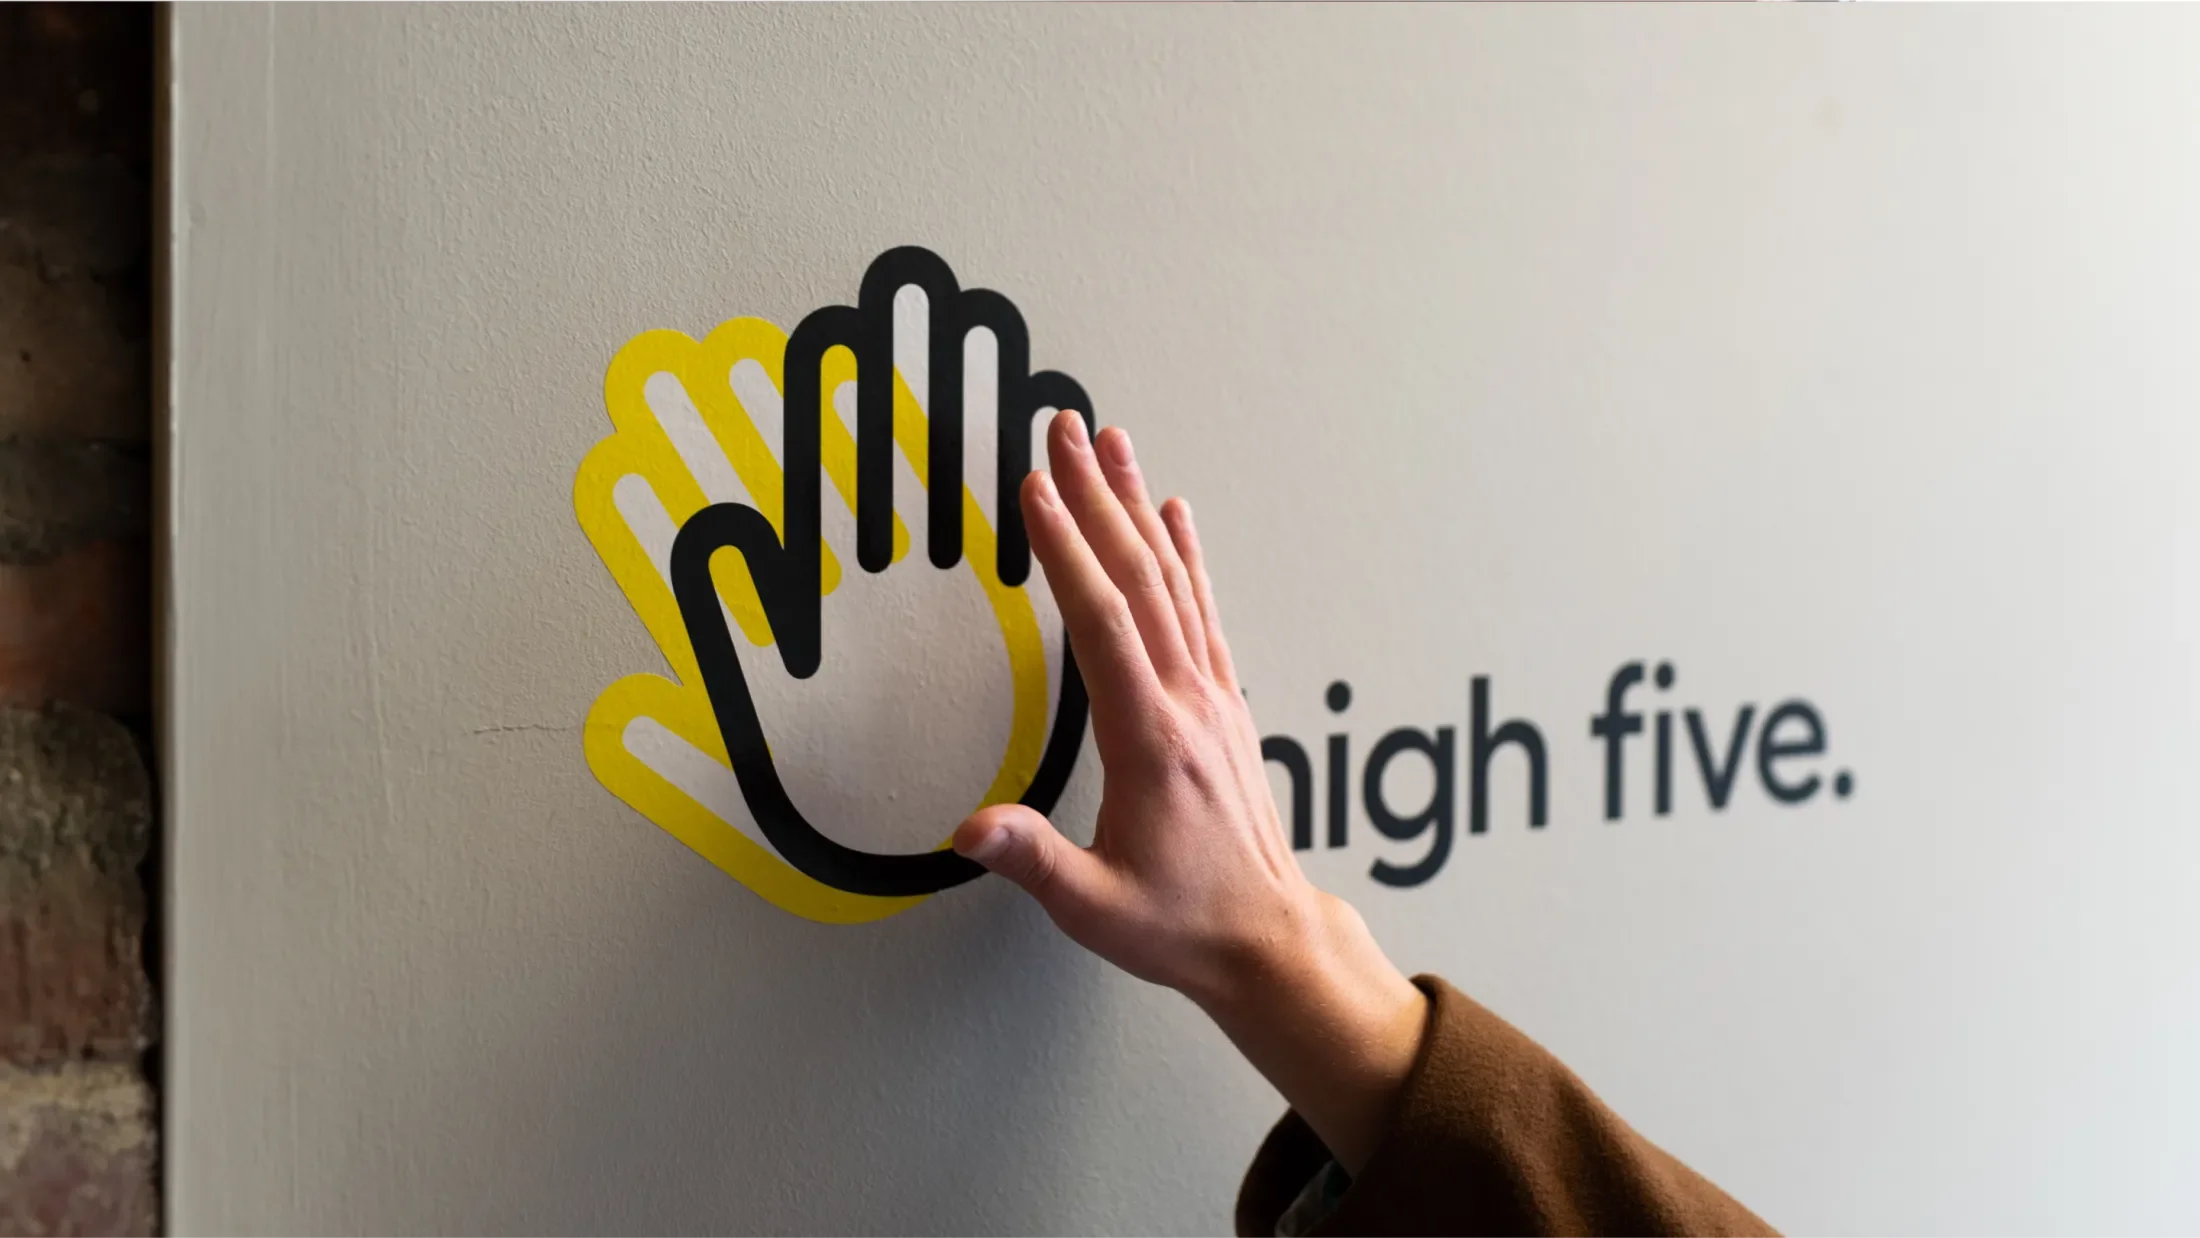 Hand touching a wall graphic of a black and a yellow hand crossing next to "high five."